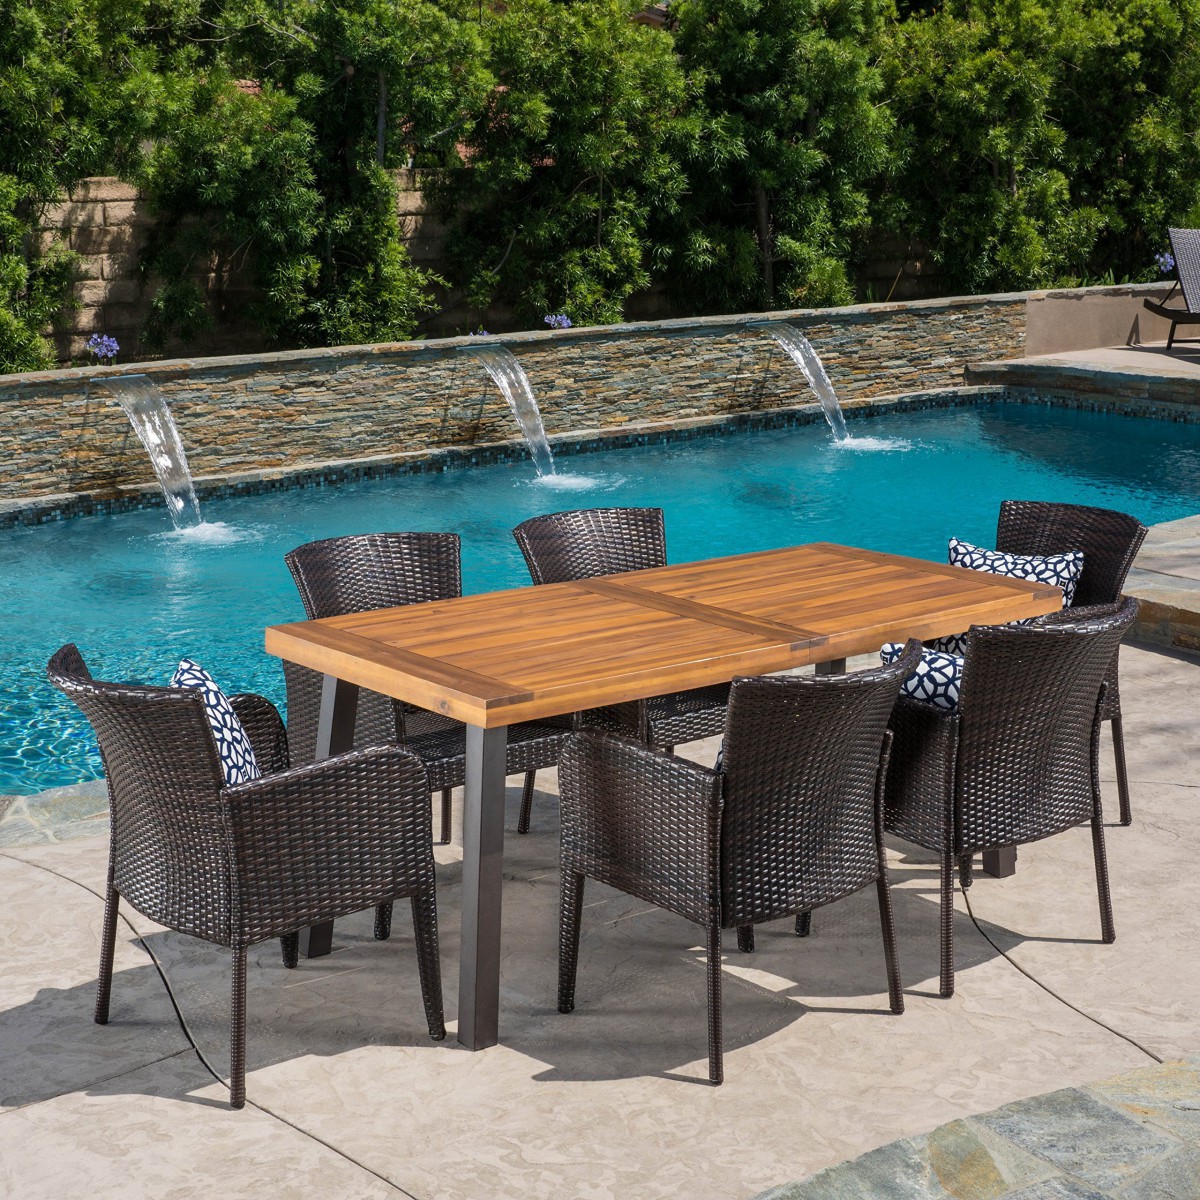 Delgado 7 Piece Outdoor Dining Set with Wood Table and ...